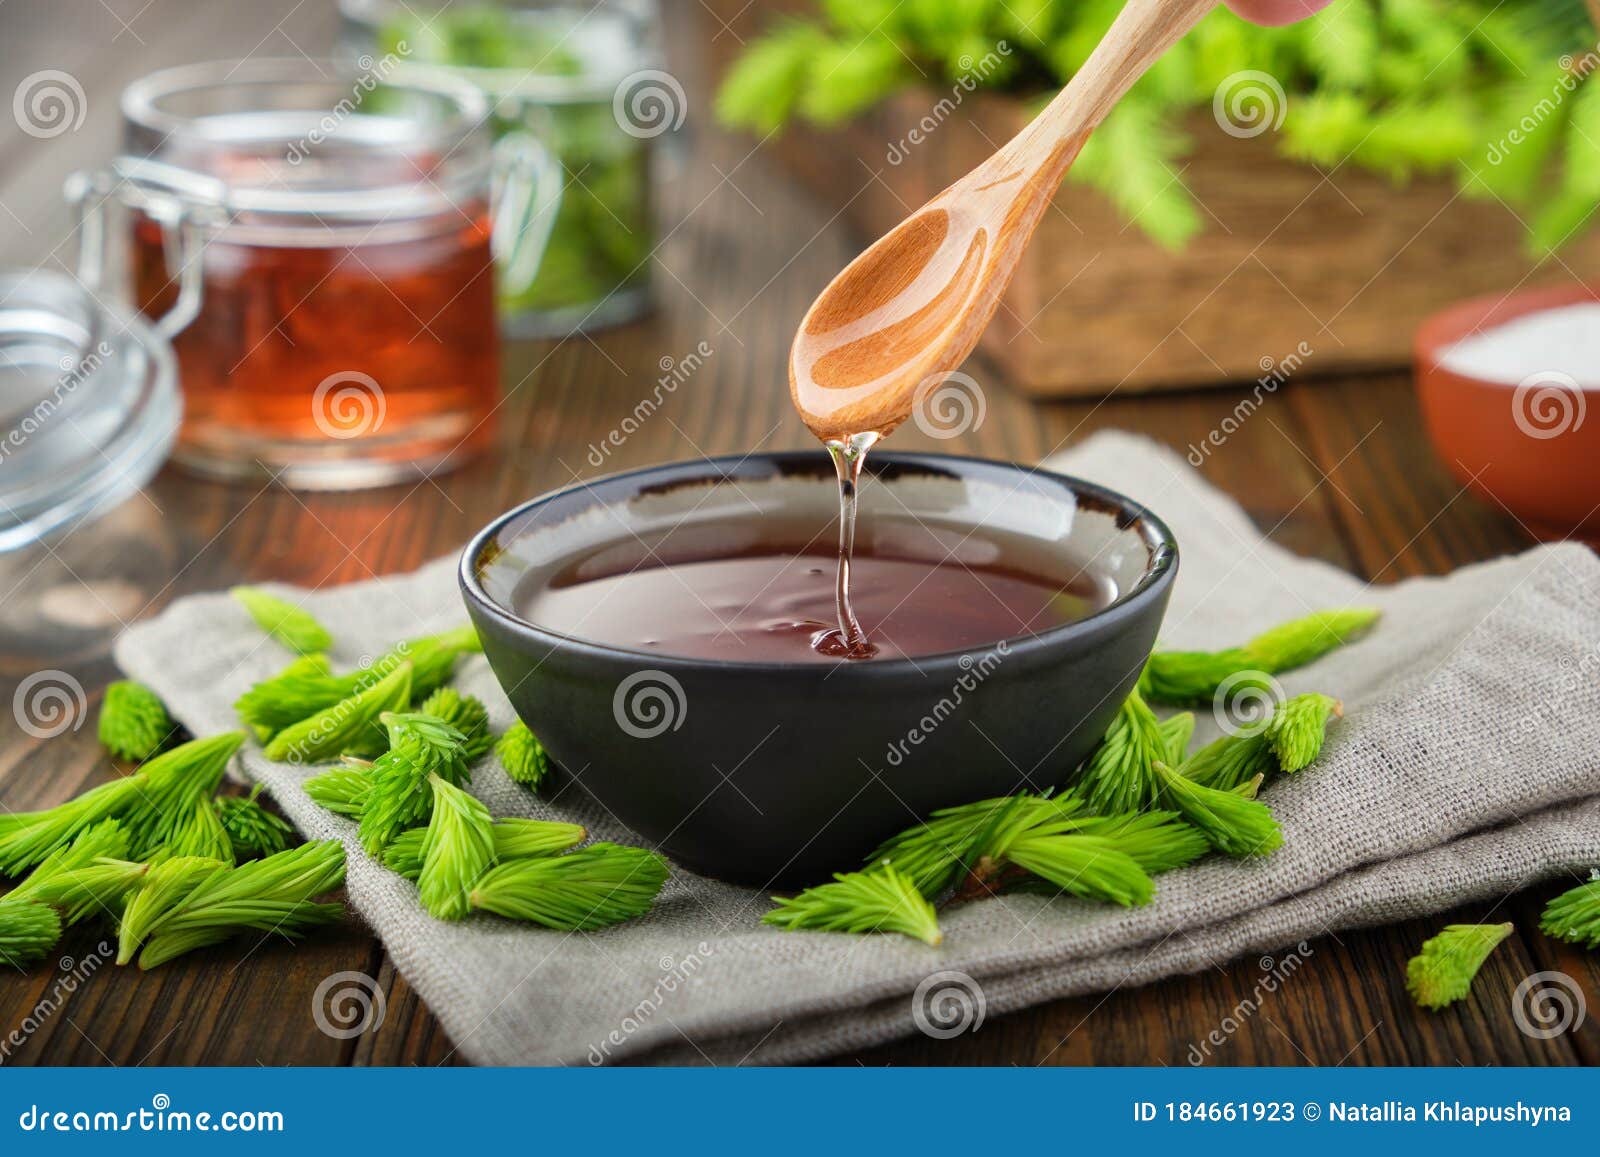 cooked syrup or honey from spruce tips in a black bowl, jar of jam or honey from fir buds and needles.